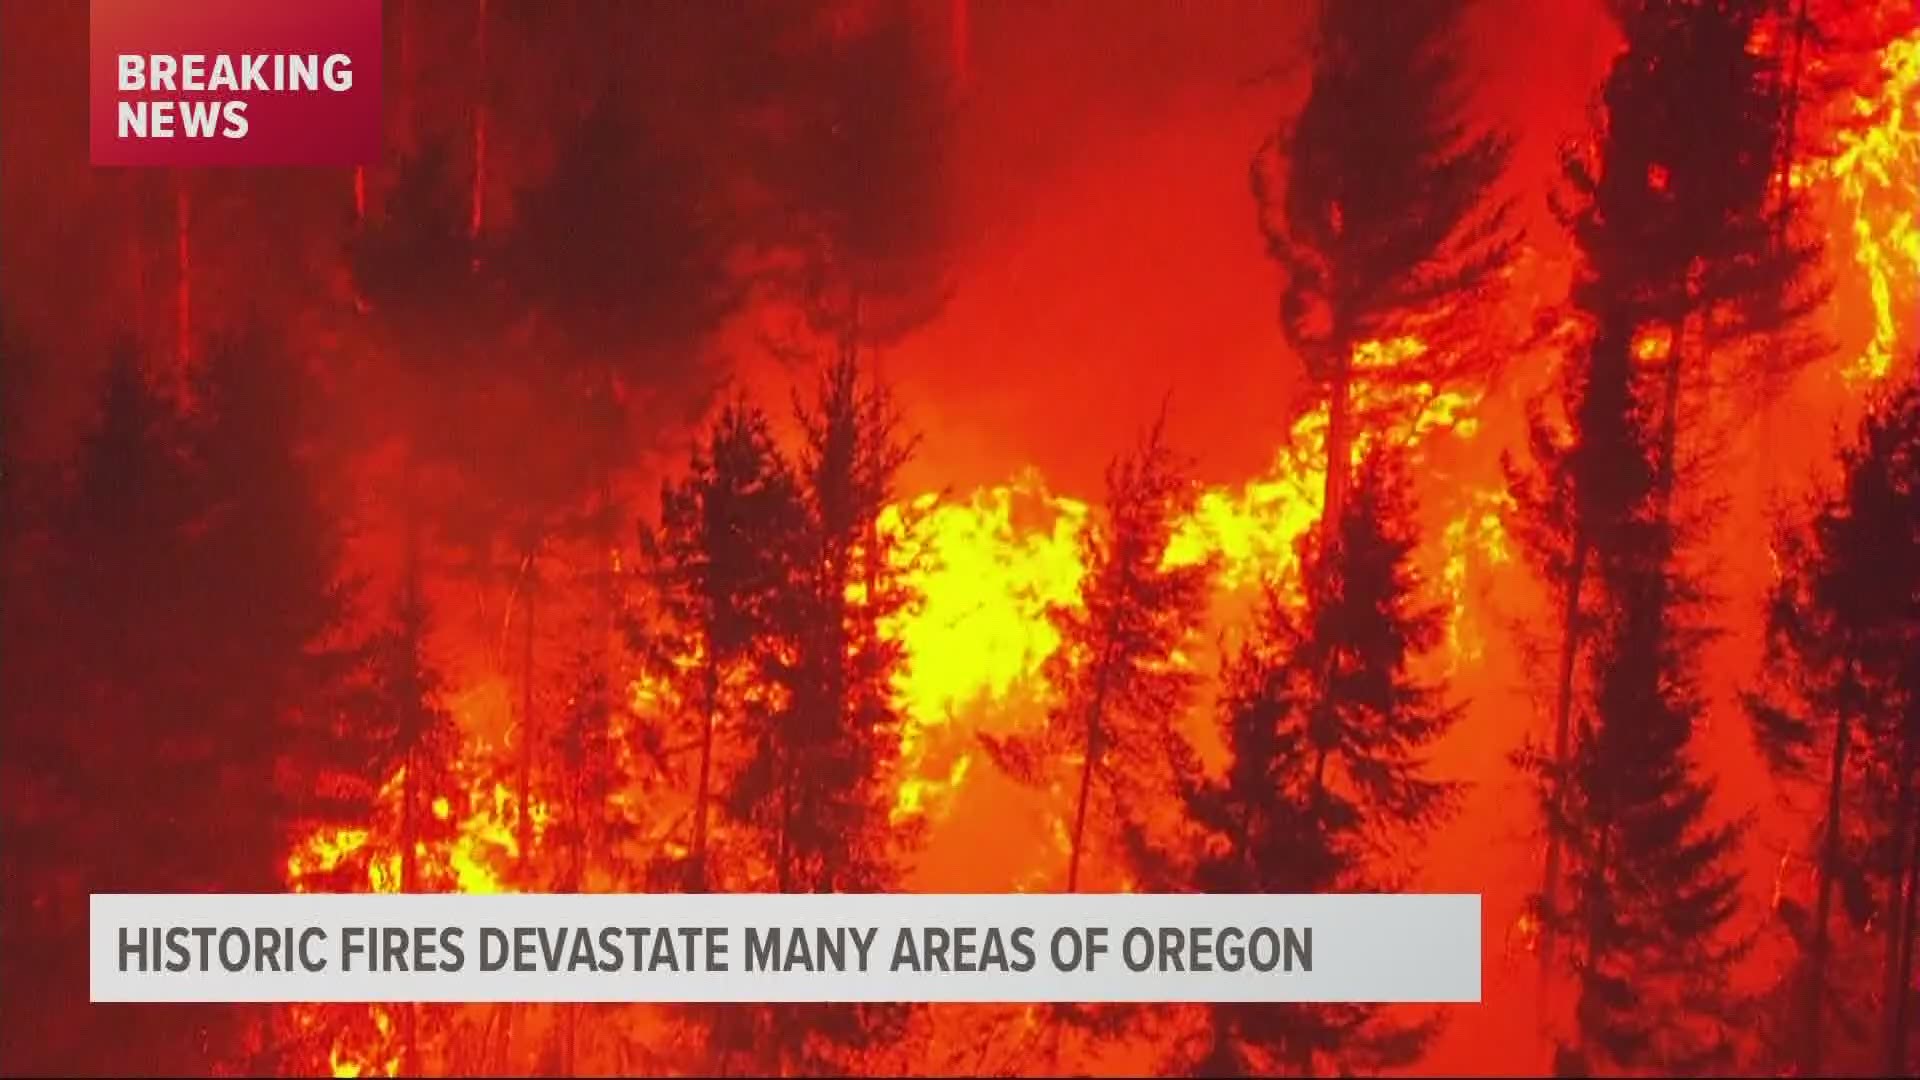 Towns in Oregon are being devastated by wildfires. Pat Dooris reports on the historic fires raging across the state.